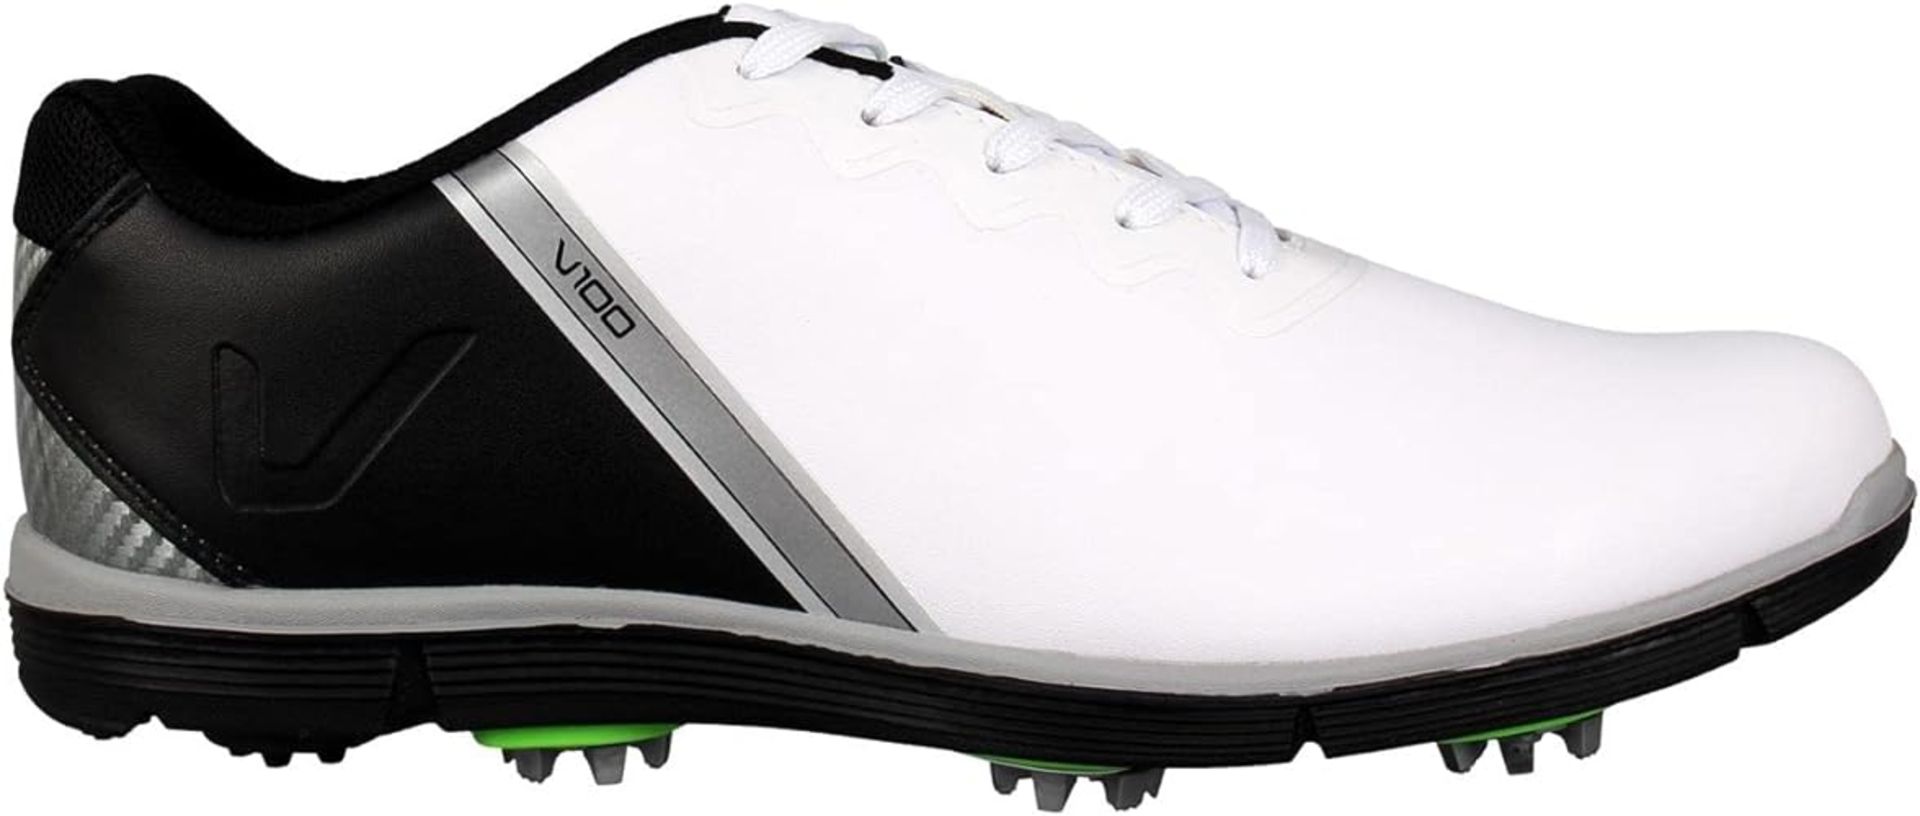 2 X BRAND NEW PAIRS OF SLAZENGER V100 PROFESSIONAL GOLF SHOES SIZE 8 RRP £89 EACH S1RA